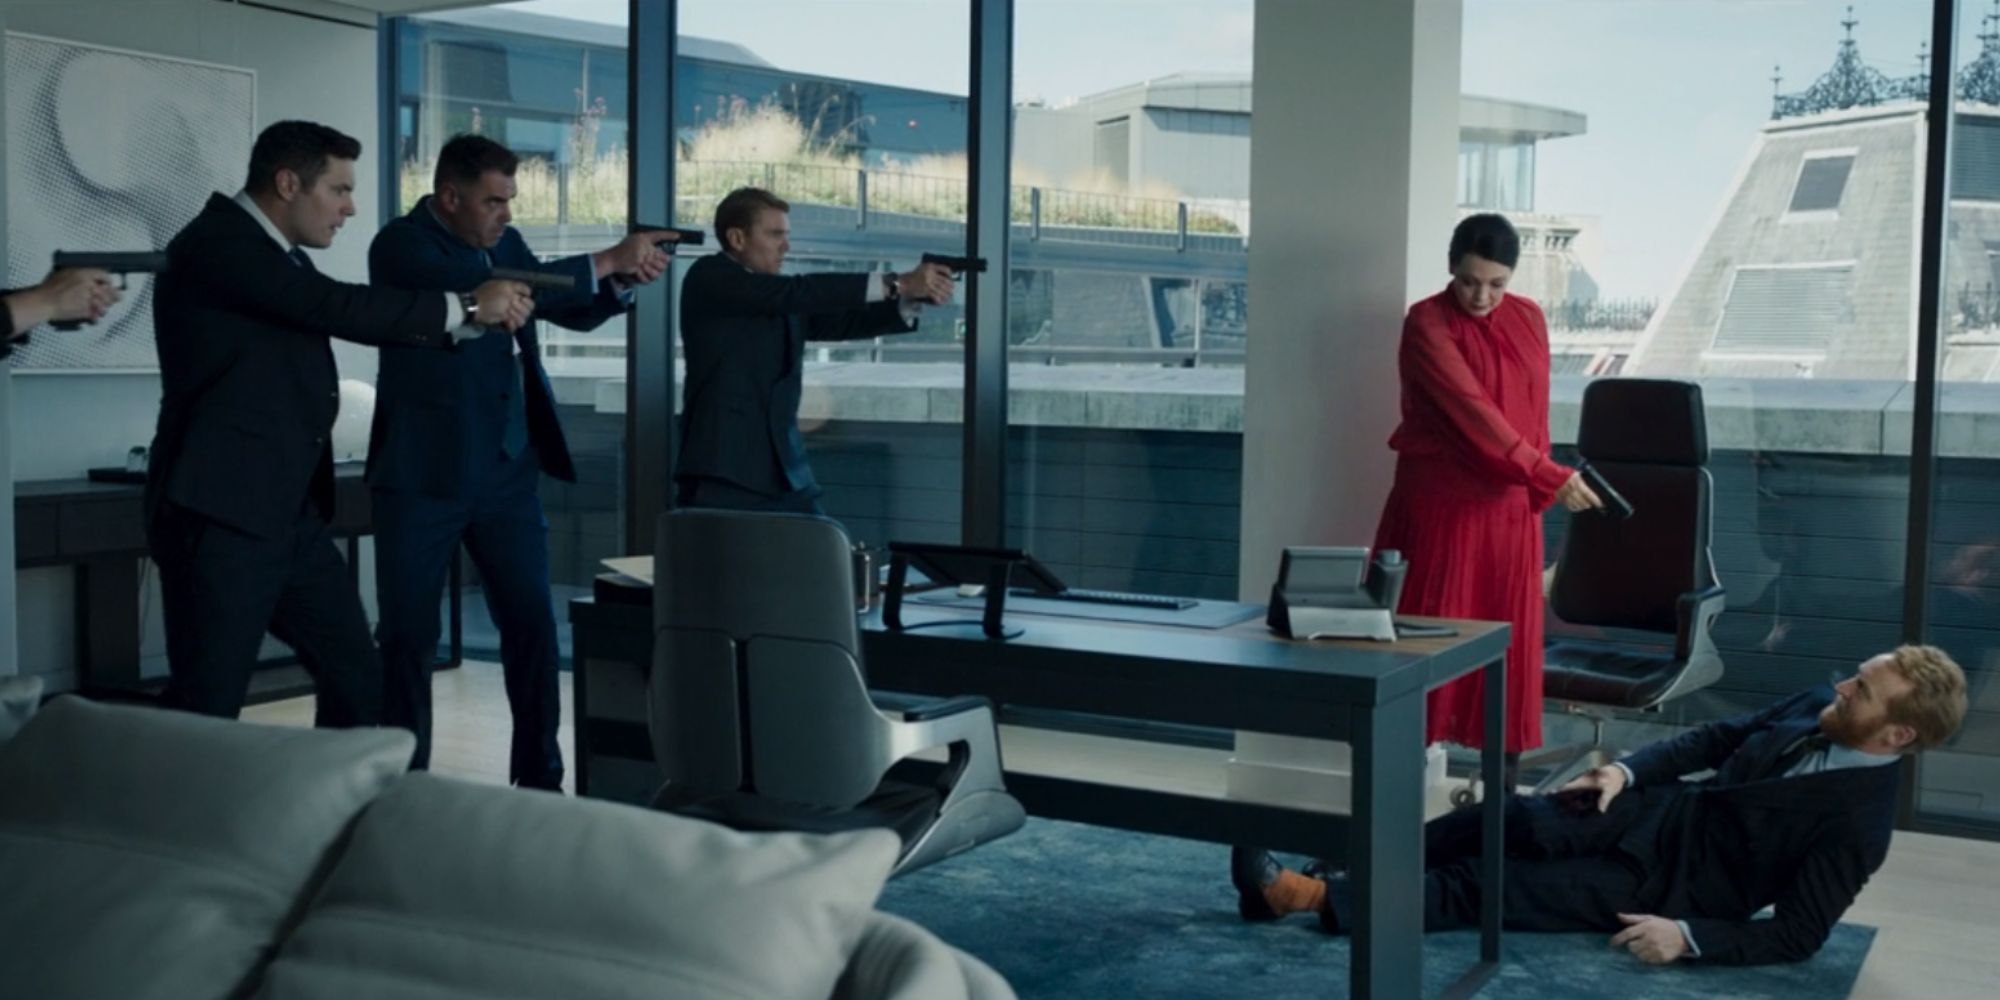 Still from Secret Invasion of Olivia Colman as Sonya Falsworth wearing a red jacket pointing a gun at the director who's lying on the floor while other agents look on